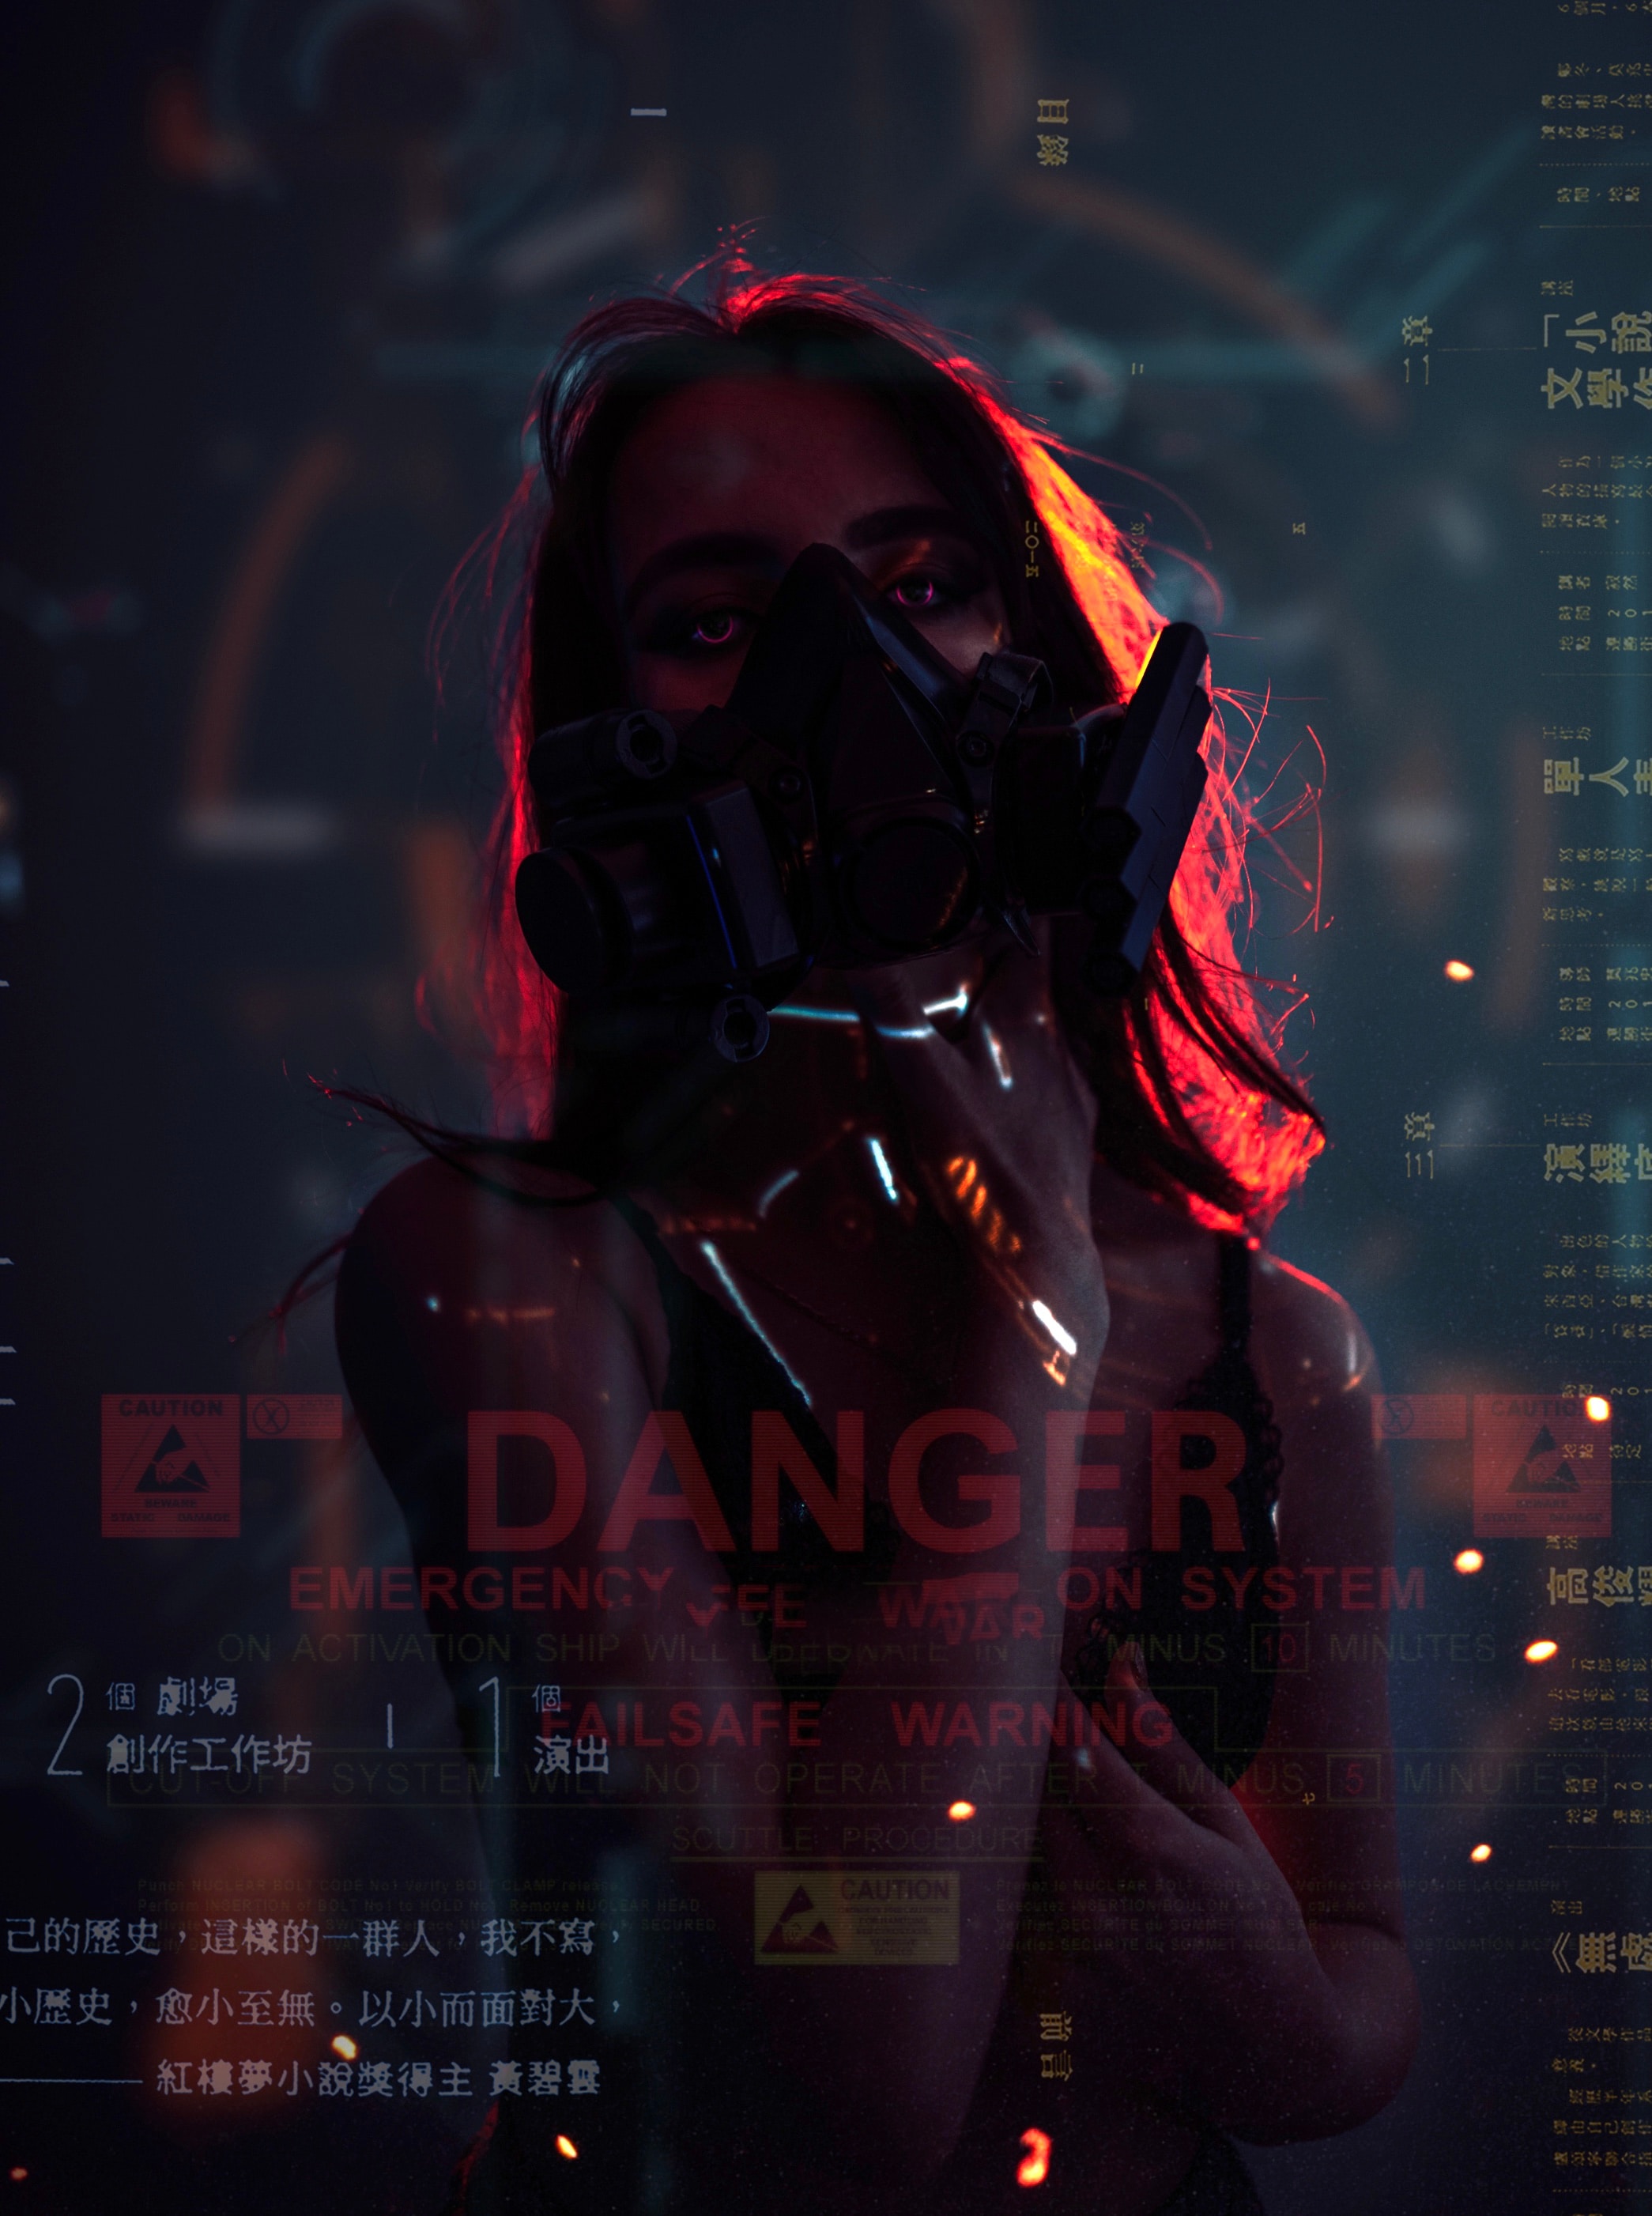 Popular Cyberpunk images for mobile phone